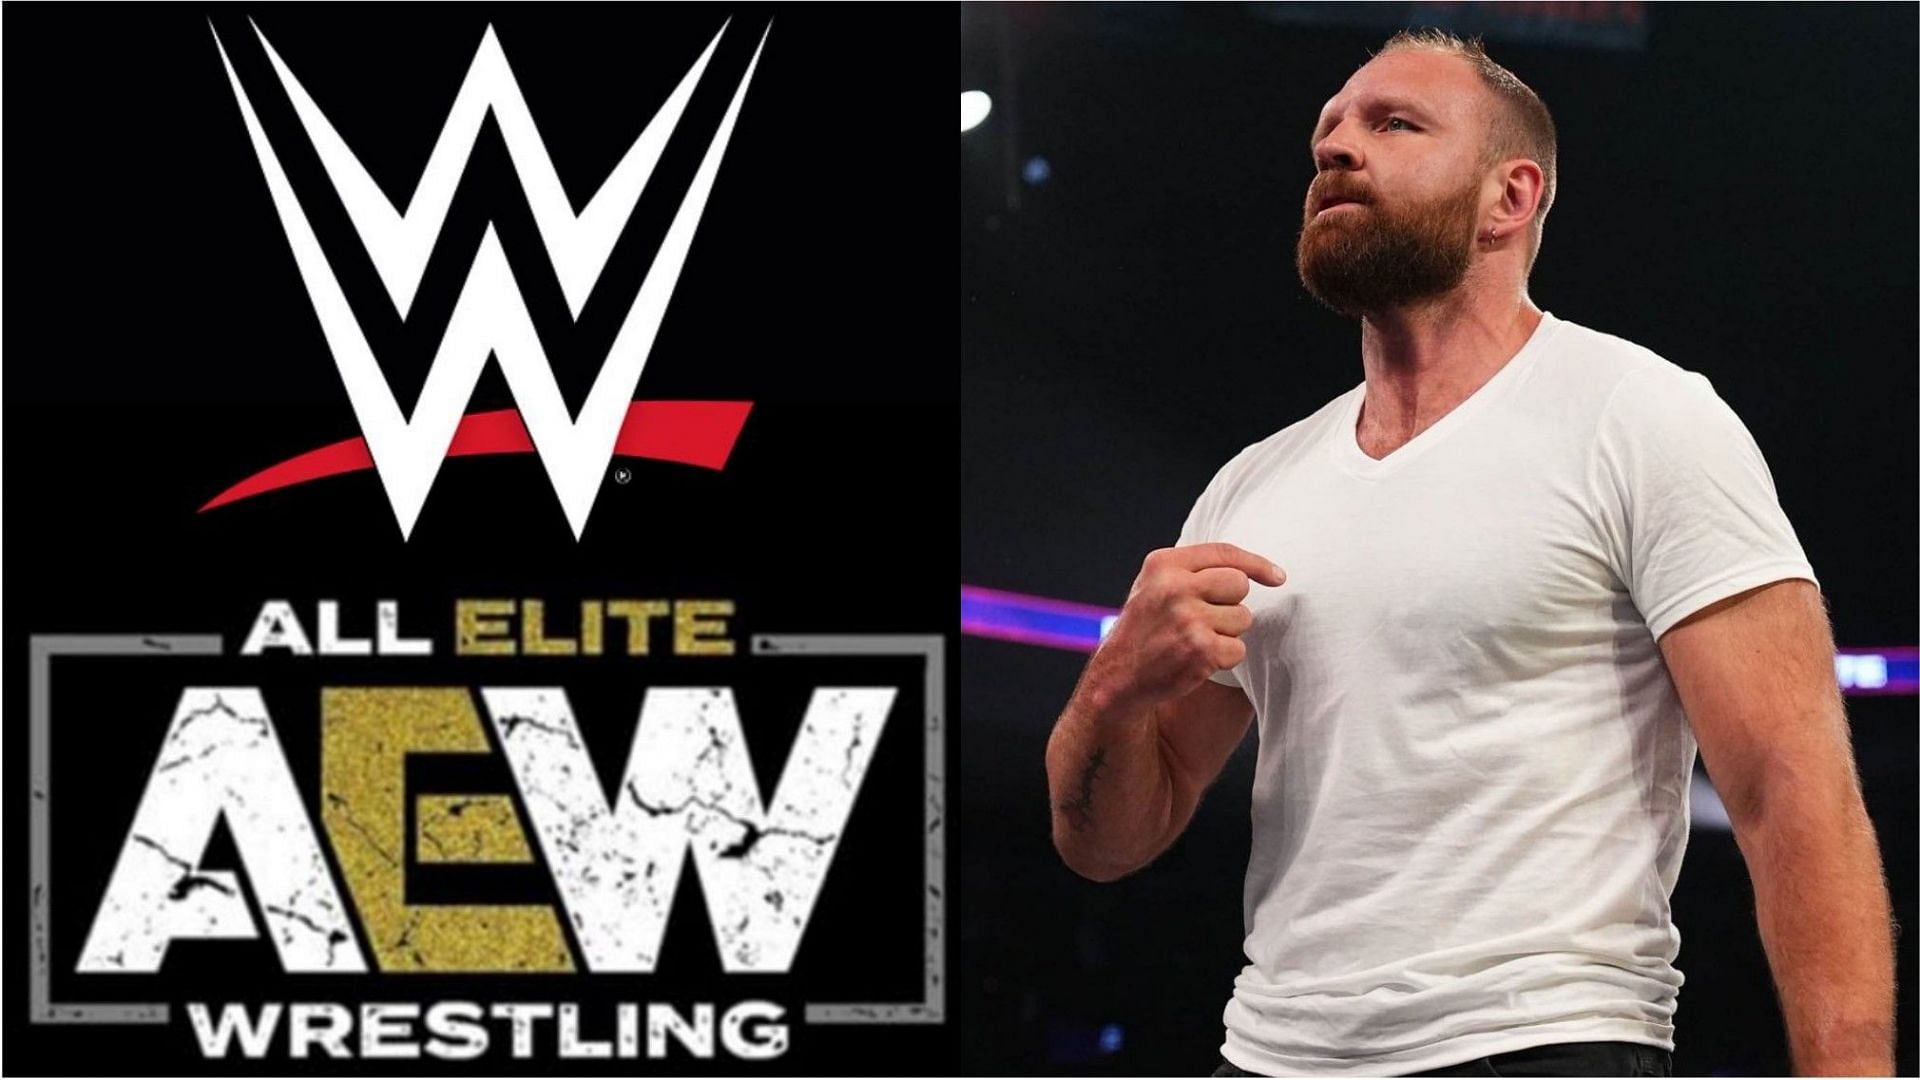 Jon Moxley is brimming with confidence after victory on Dynamite last week!